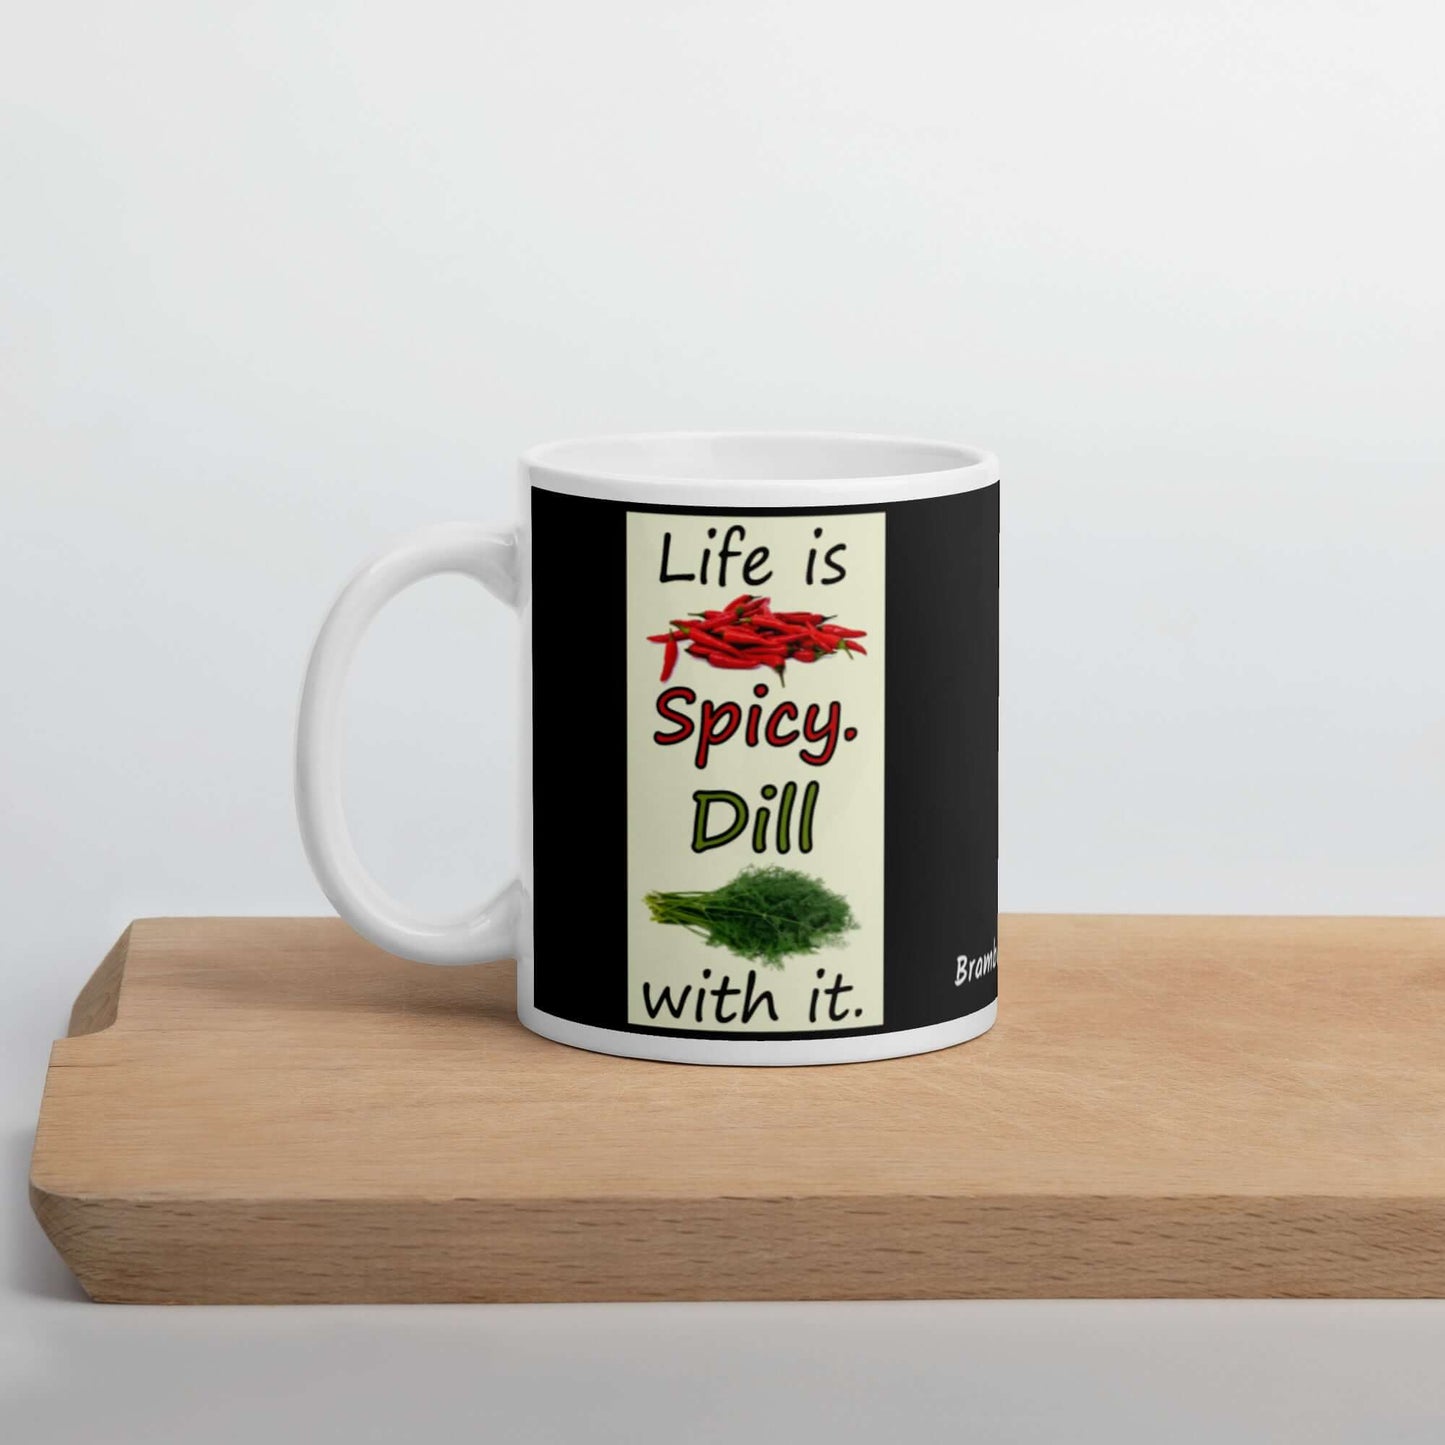 11 ounce white glossy ceramic mug. Life is Spicy. Dill with it text. Image of chili peppers and dill weed on a light yellow rectangle. Black background on mug. Shown on cutting board.